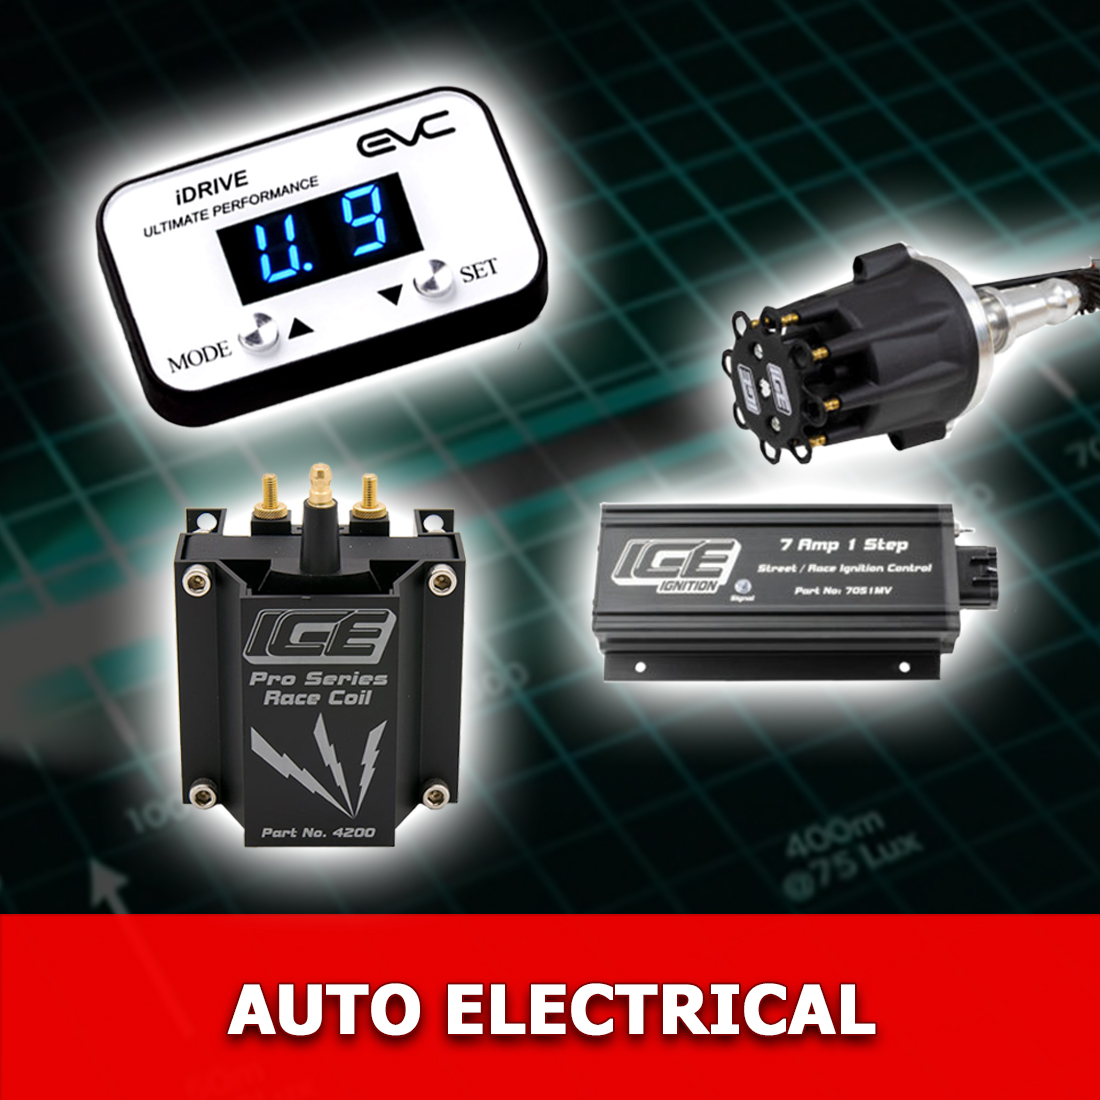 Automotive Electrical & Lighting @ Playtime Auto Parts